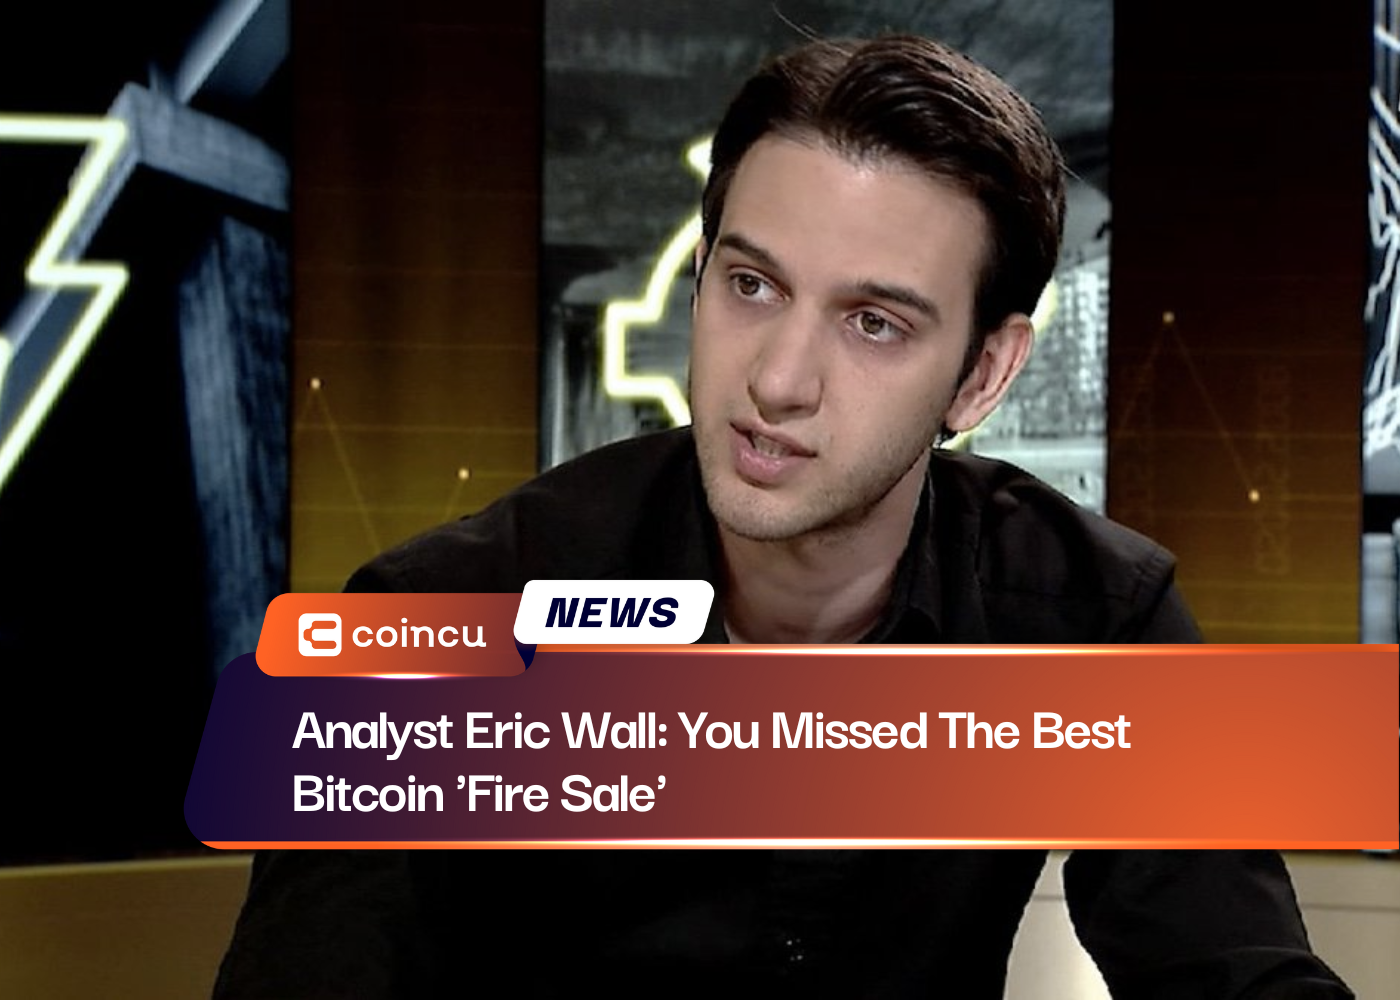 Analyst Eric Wall: You Missed The Best Bitcoin 'Fire Sale'